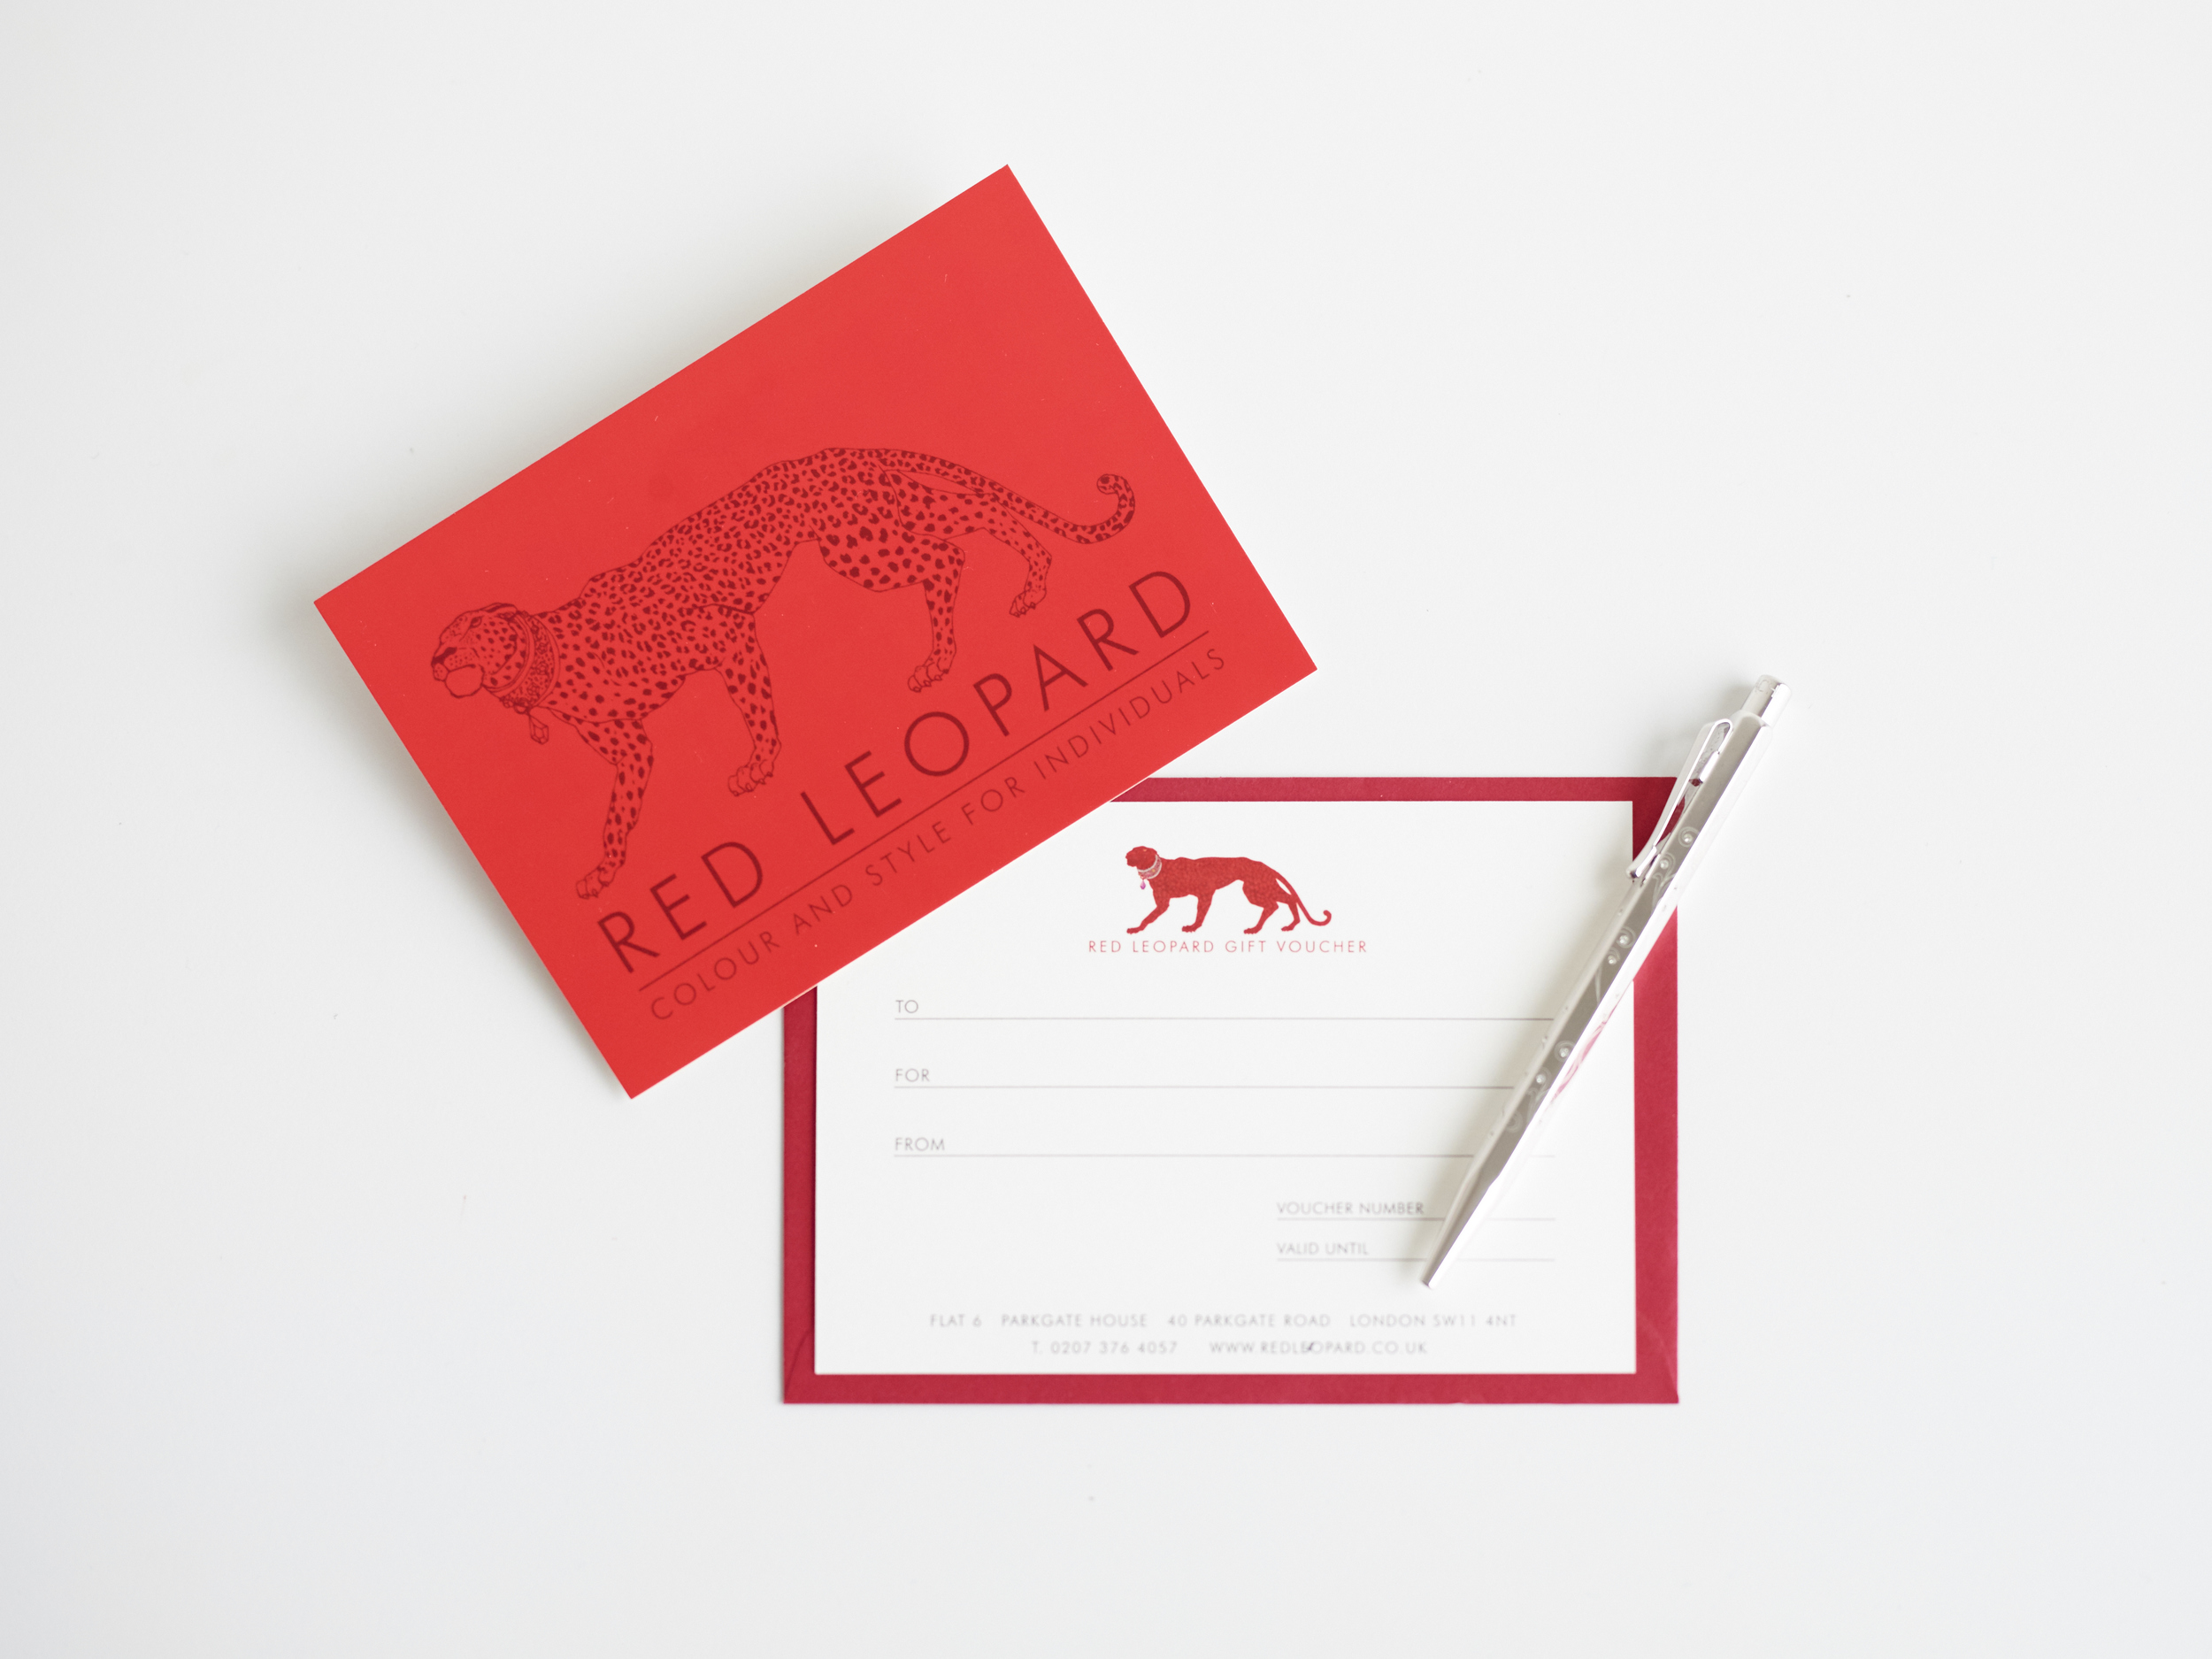 What it costs — Red Leopard